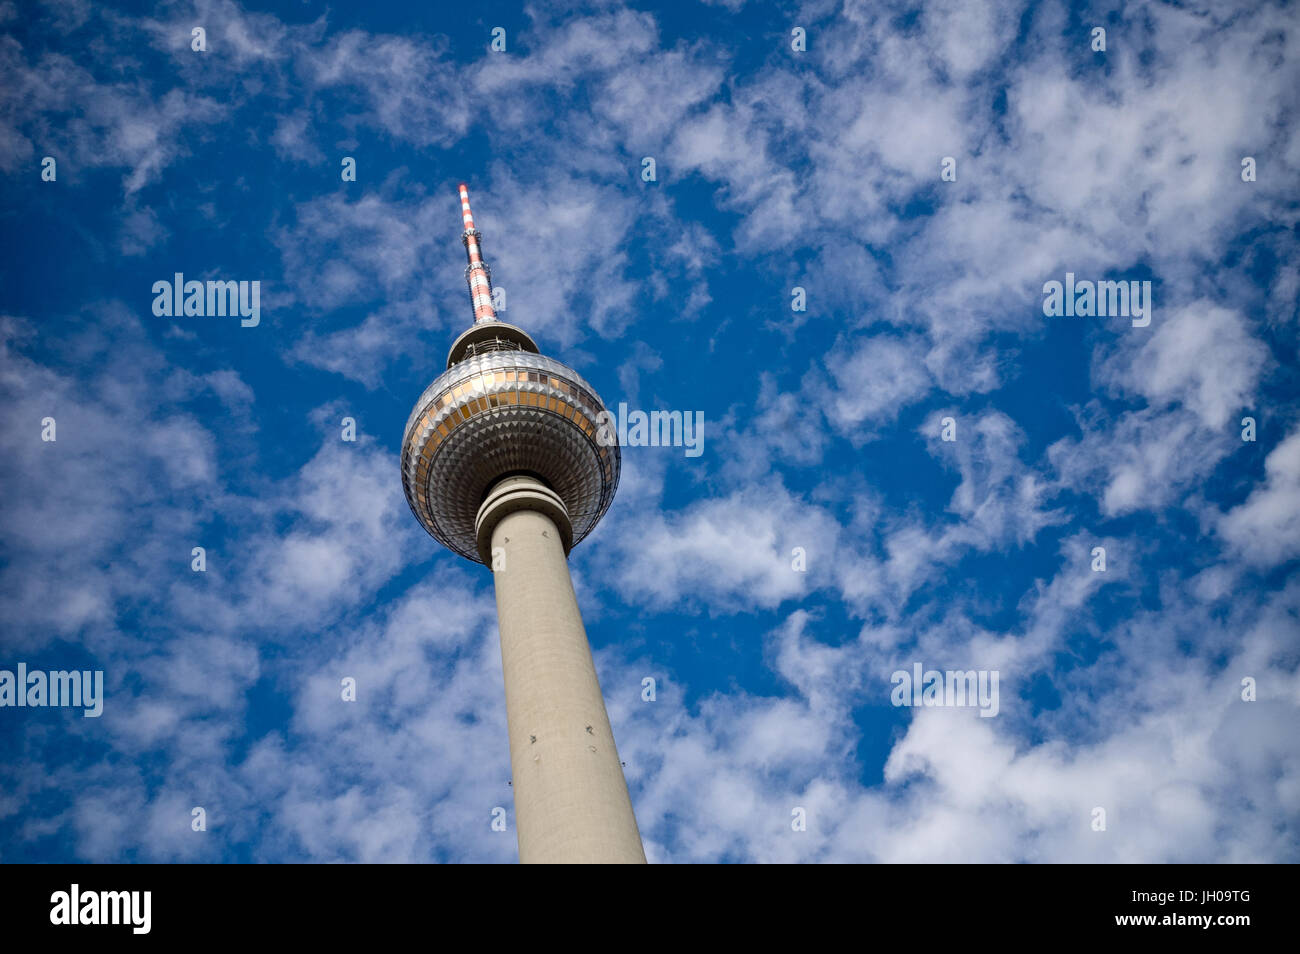 The TV tower on the Alexanderplatz in Berlin with blue sky and white clouds in the background. Stock Photo